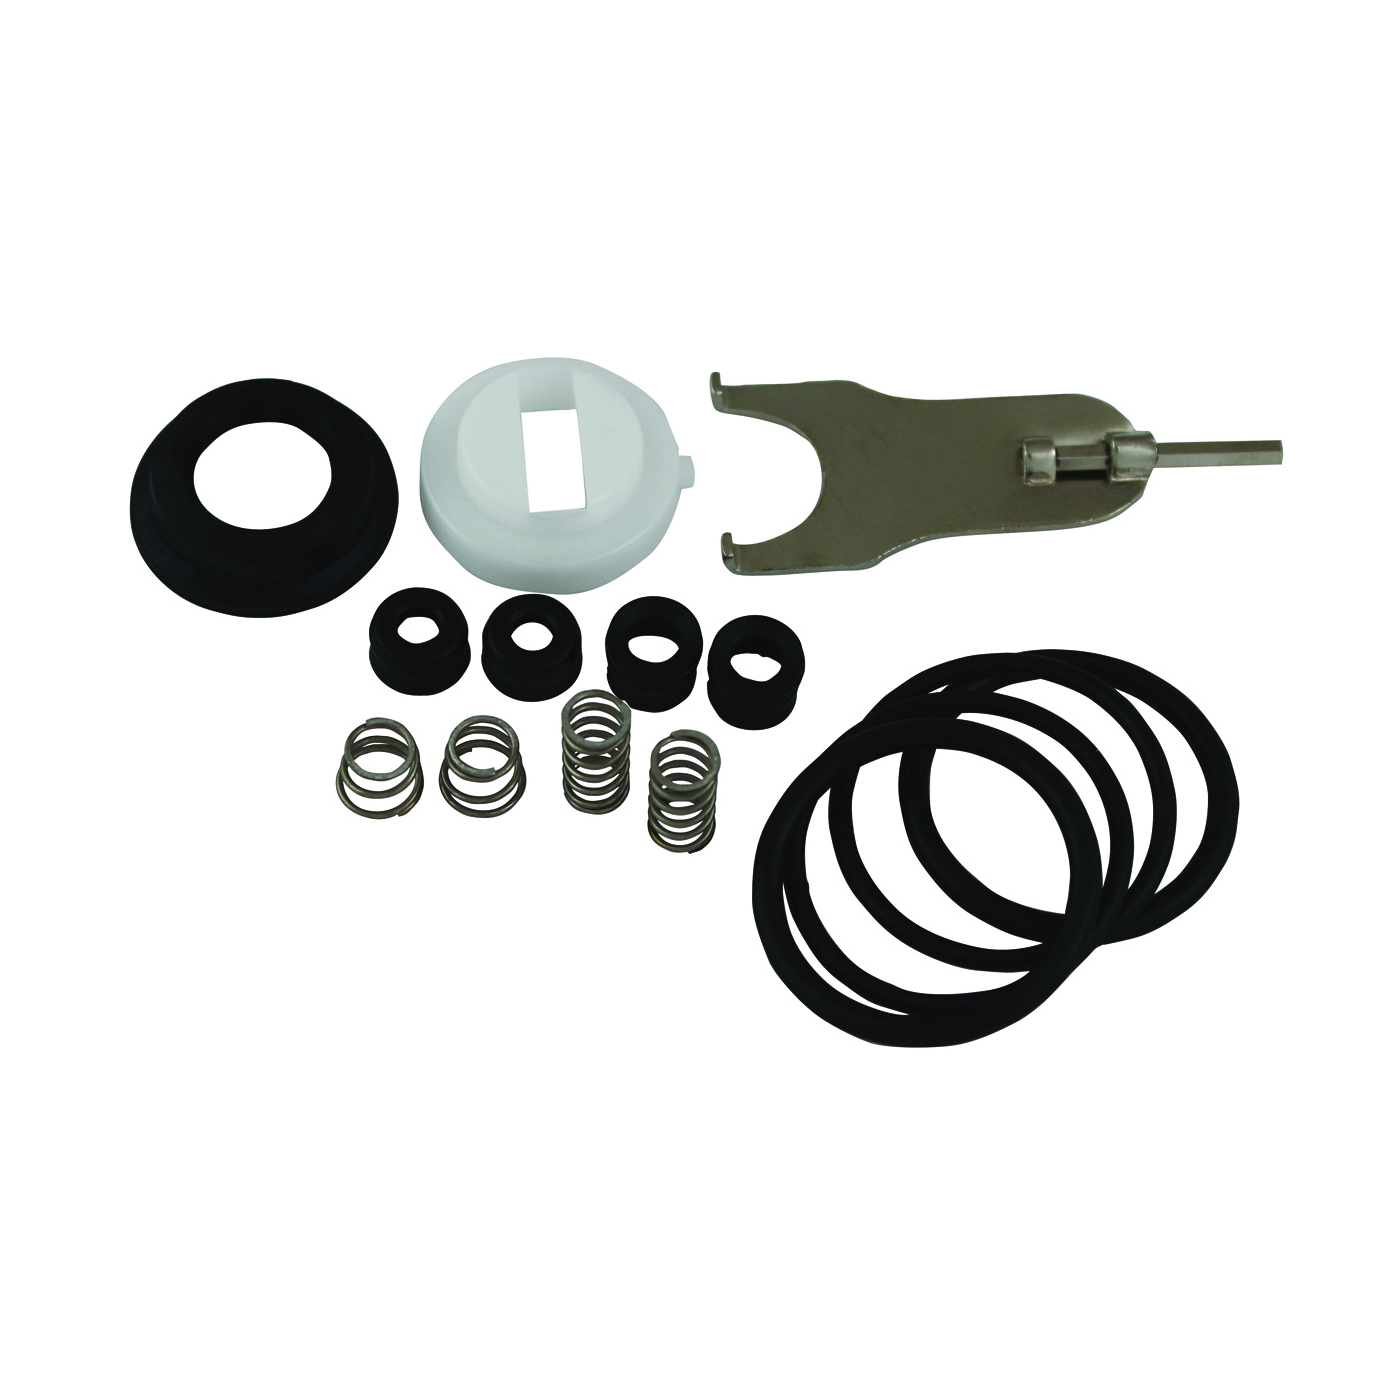 PP808-74 Faucet Repair Kit, For: Delta/Del Dial Faucets with Swing Spout